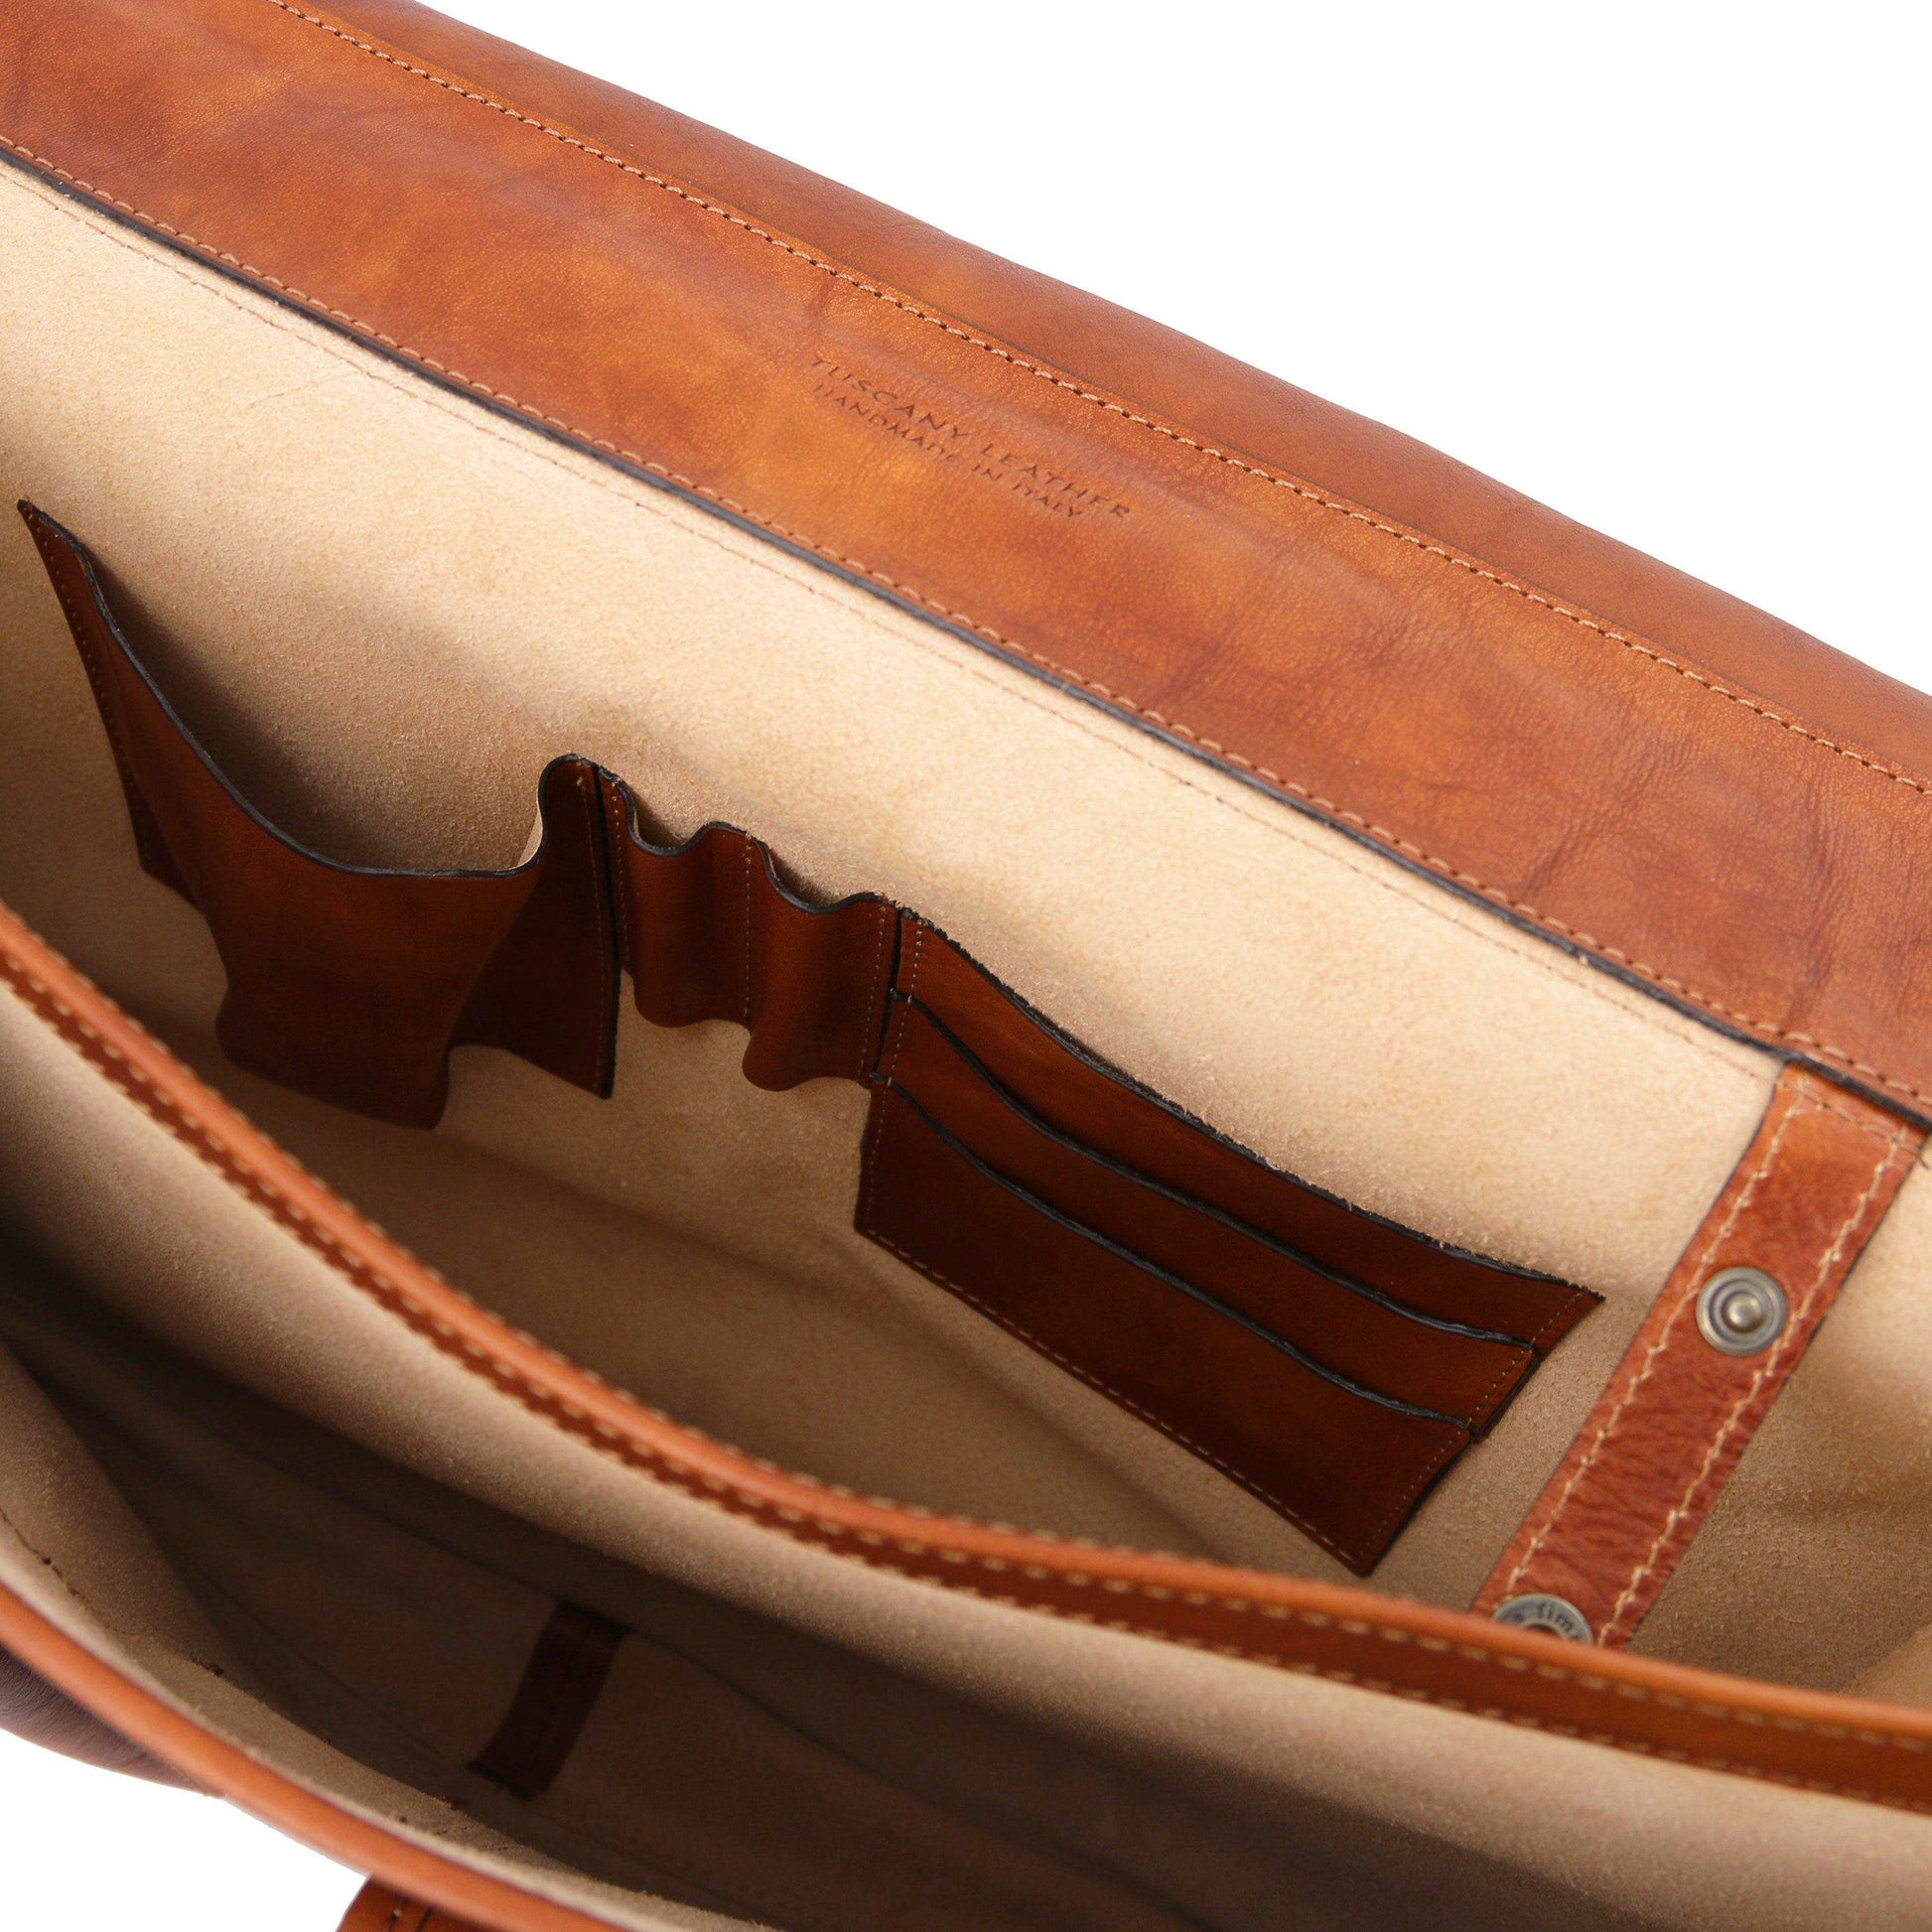 Ancona - Leather messenger bag | TL142073 - Premium Leather briefcases - Shop now at San Rocco Italia